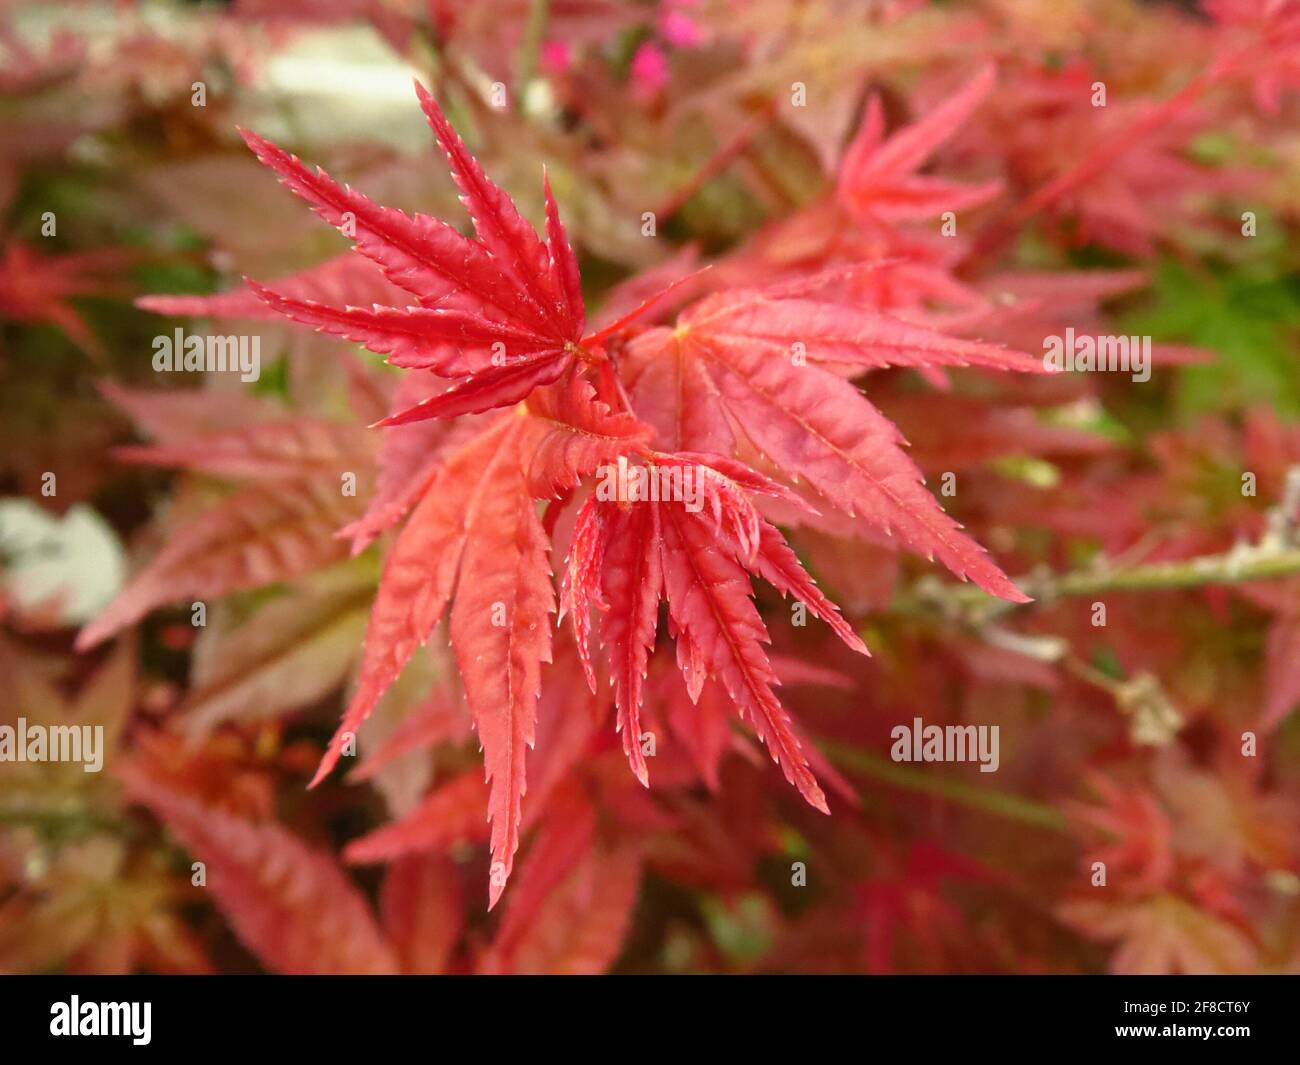 Selective focus shot of red palm-shaped maple leaves Stock Photo